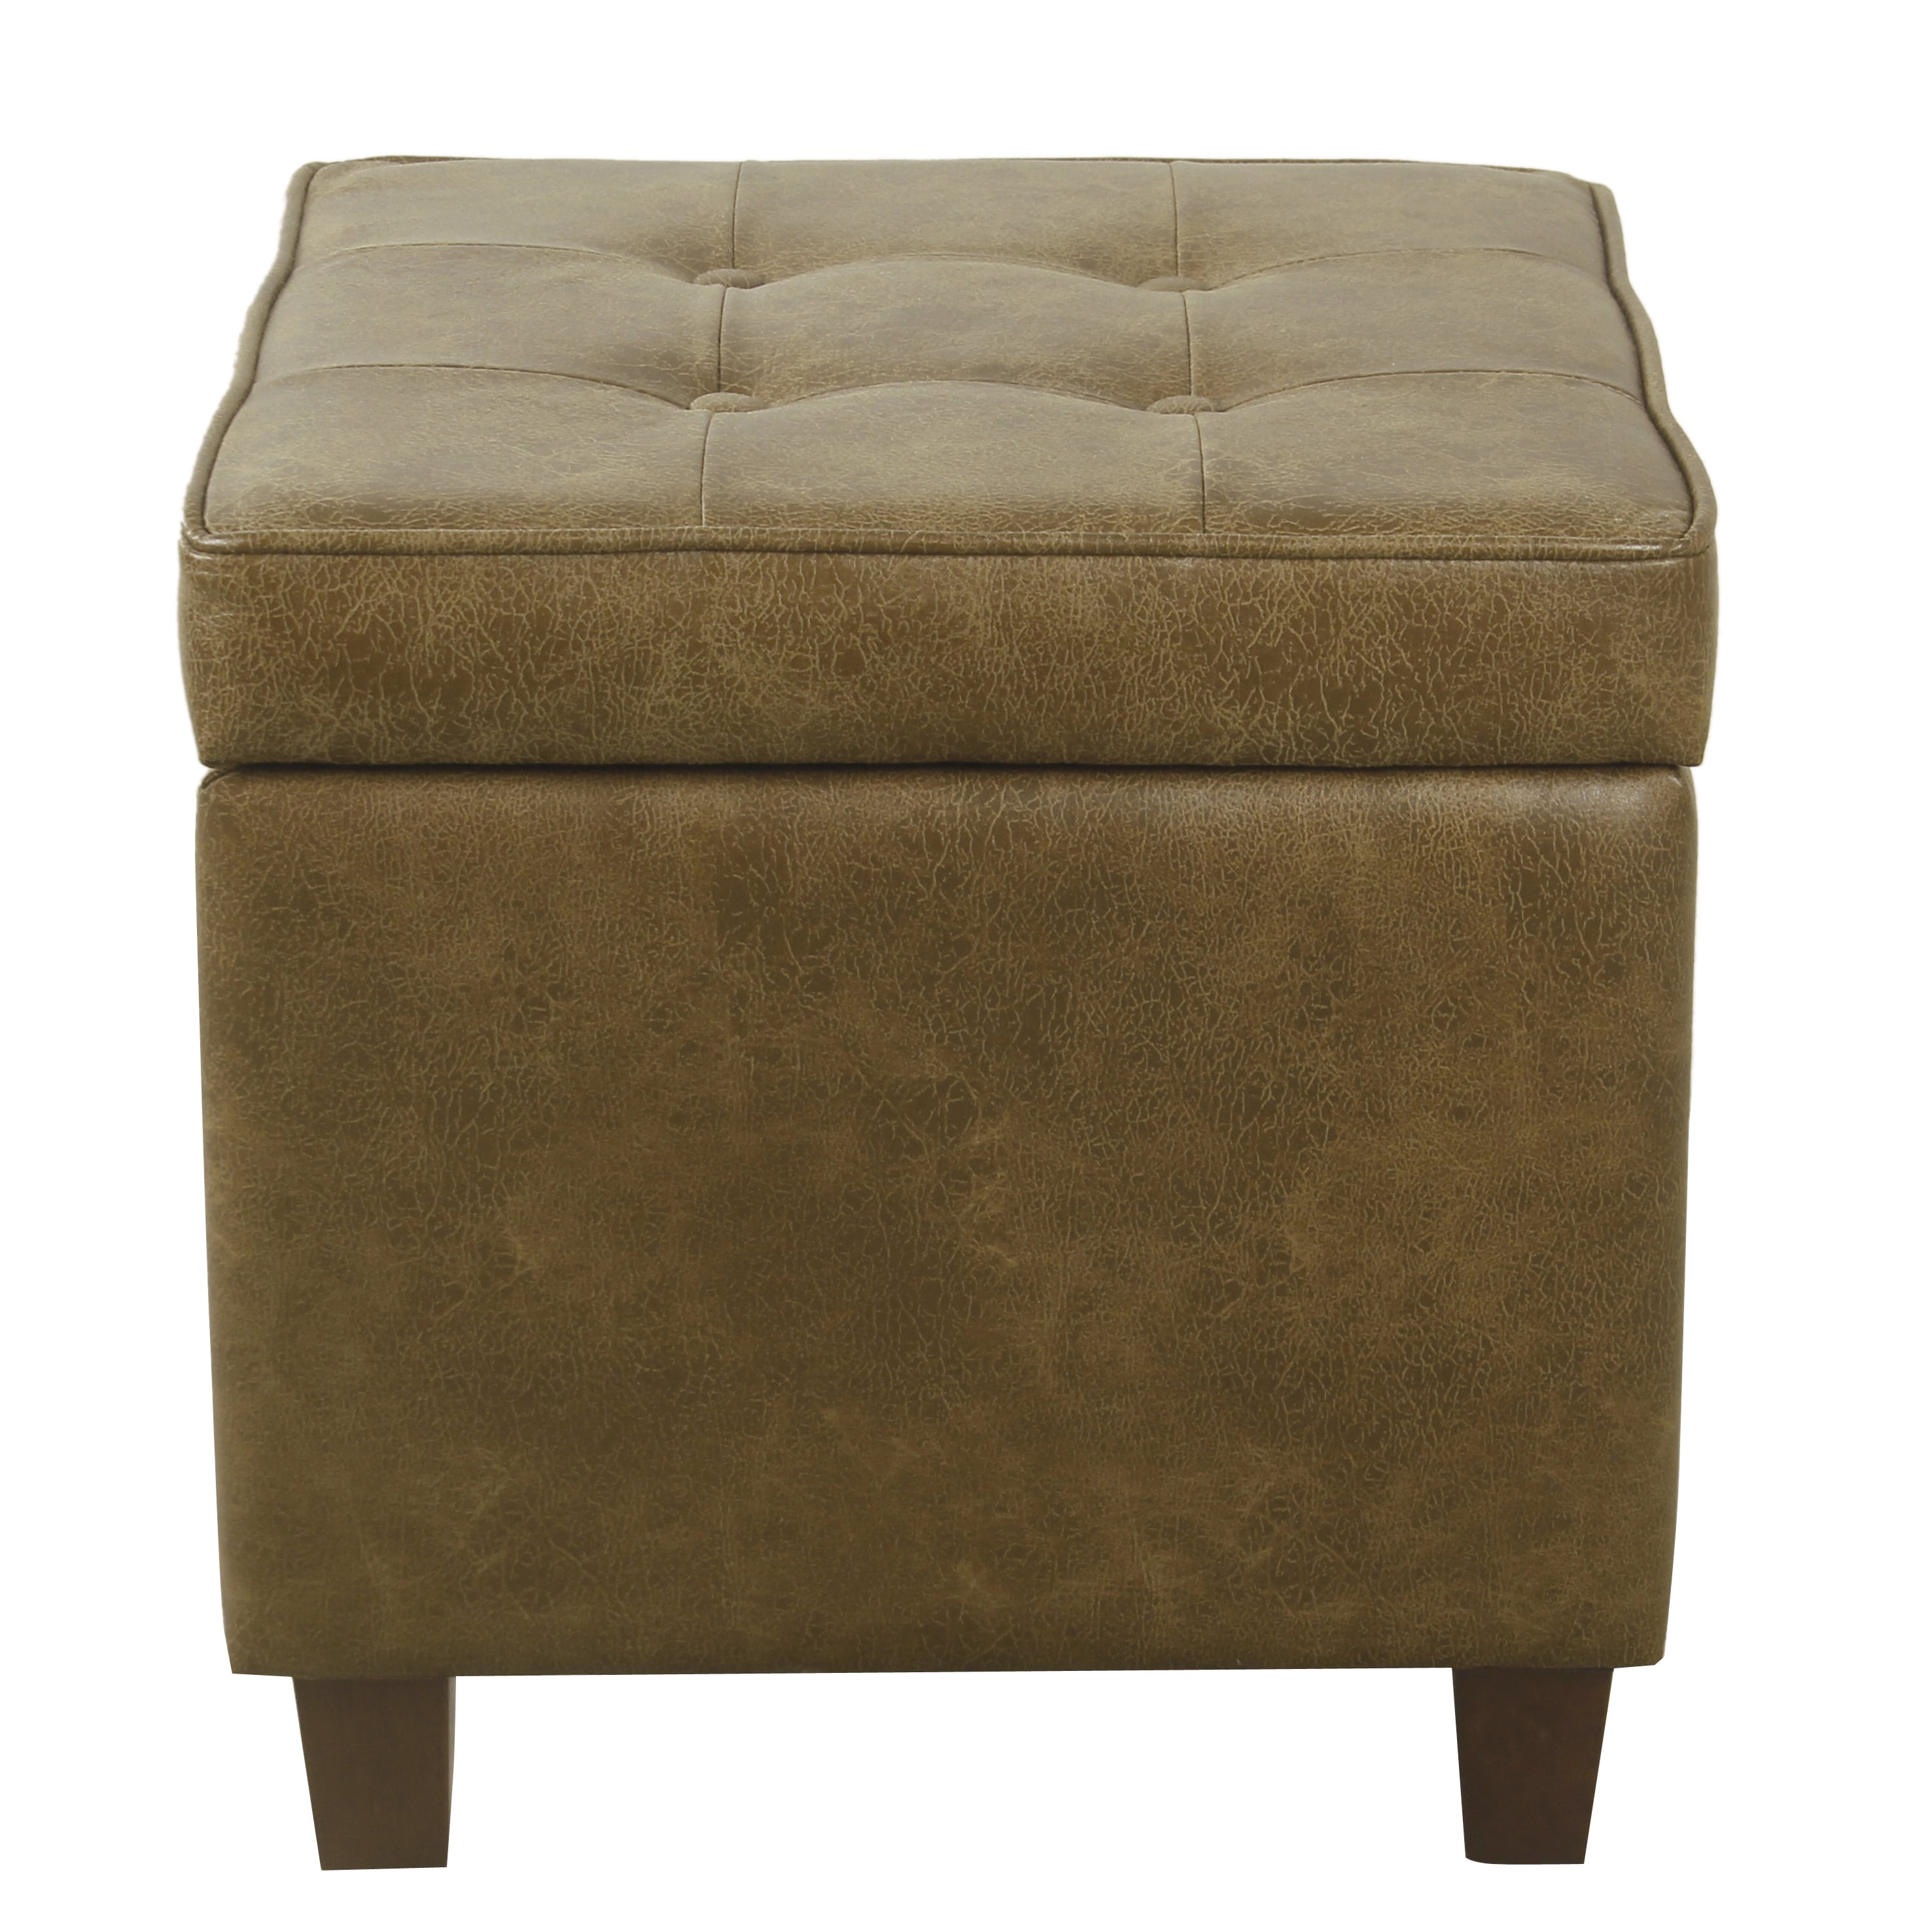 Homepop Square Tufted Storage Ottoman, Brown Tufted Leather Storage Ottoman Bench